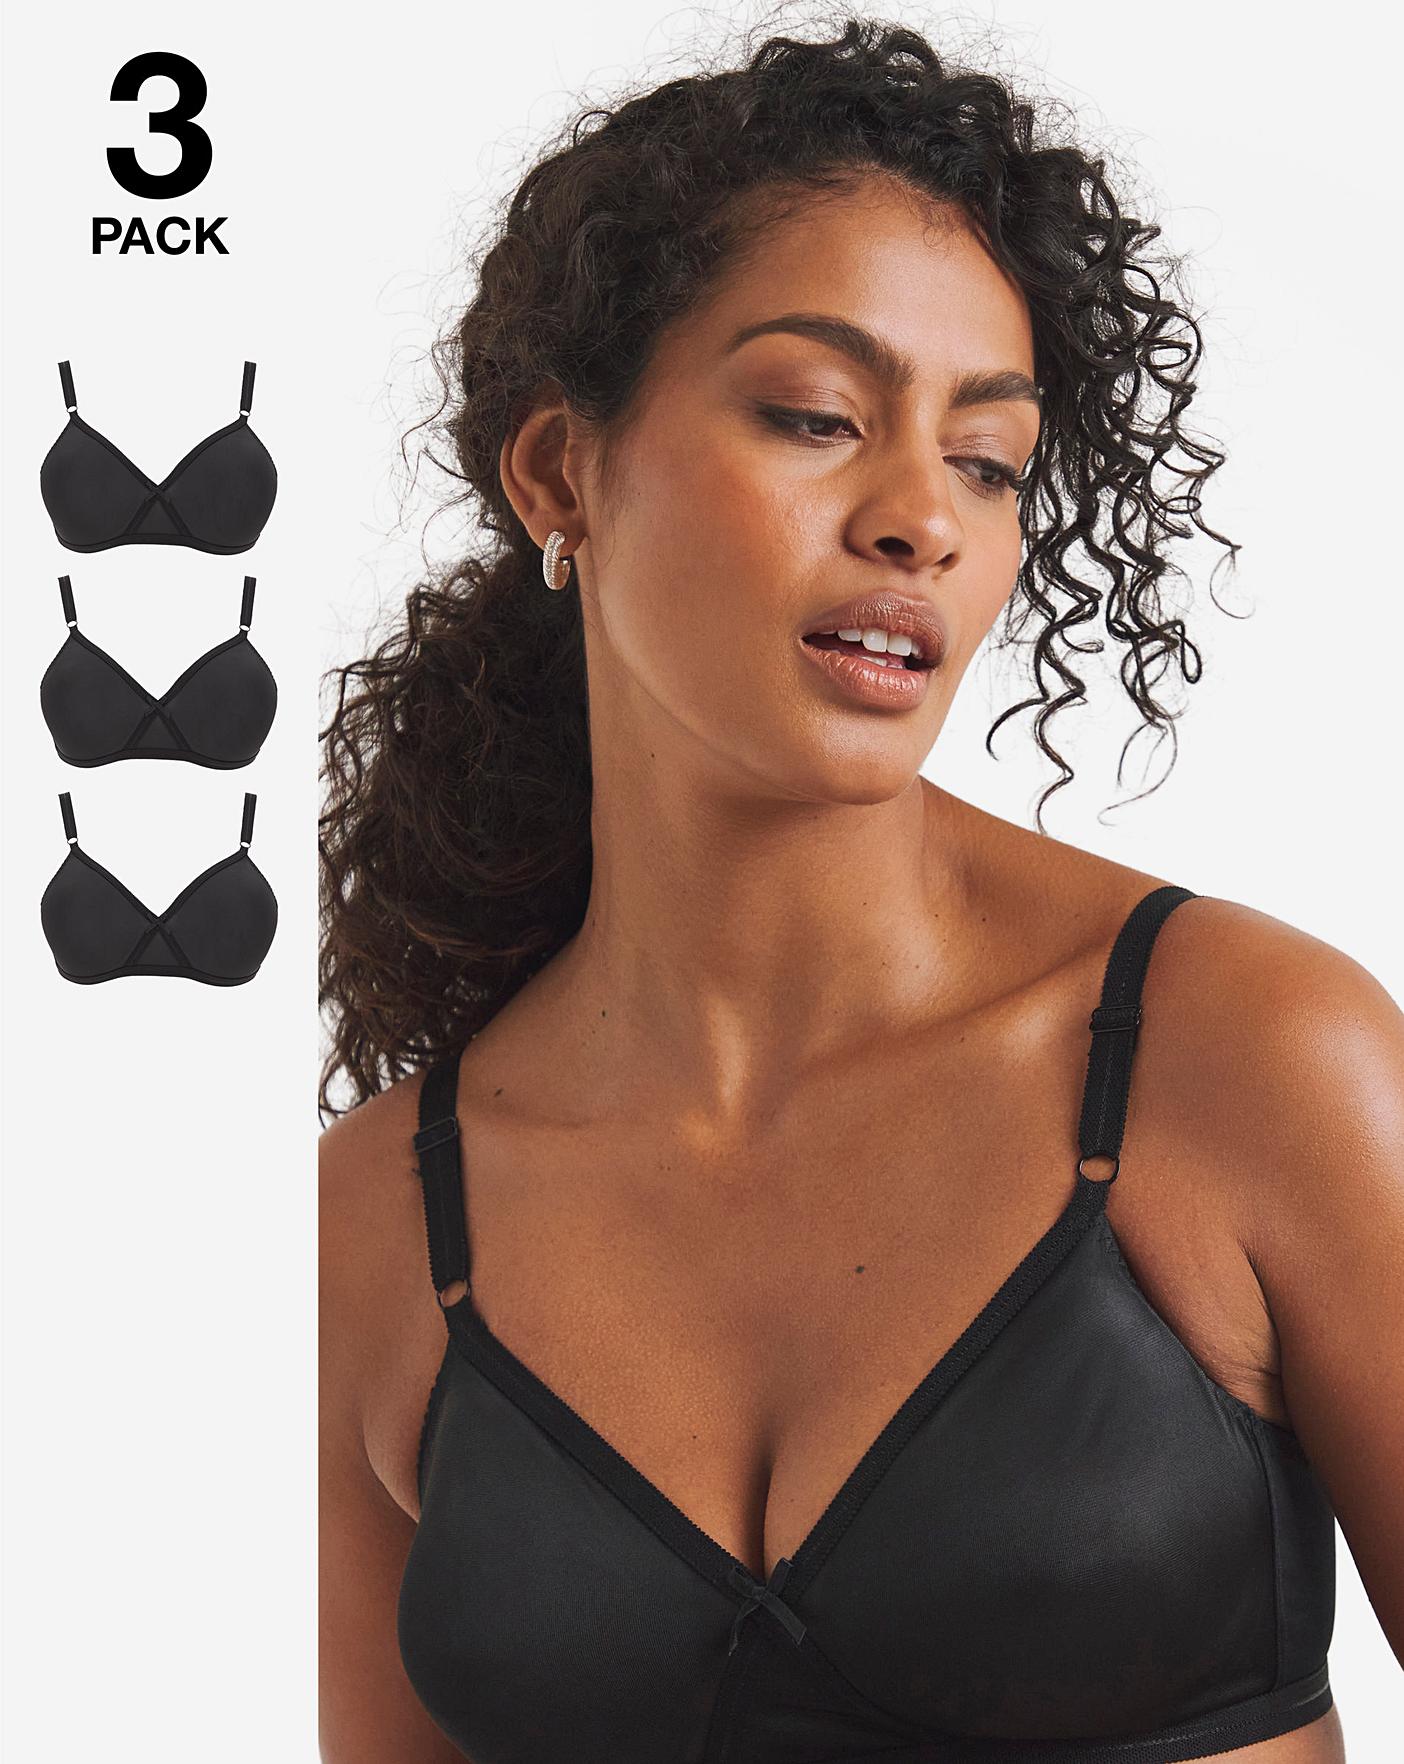 Why Do Wired Bras Exist?